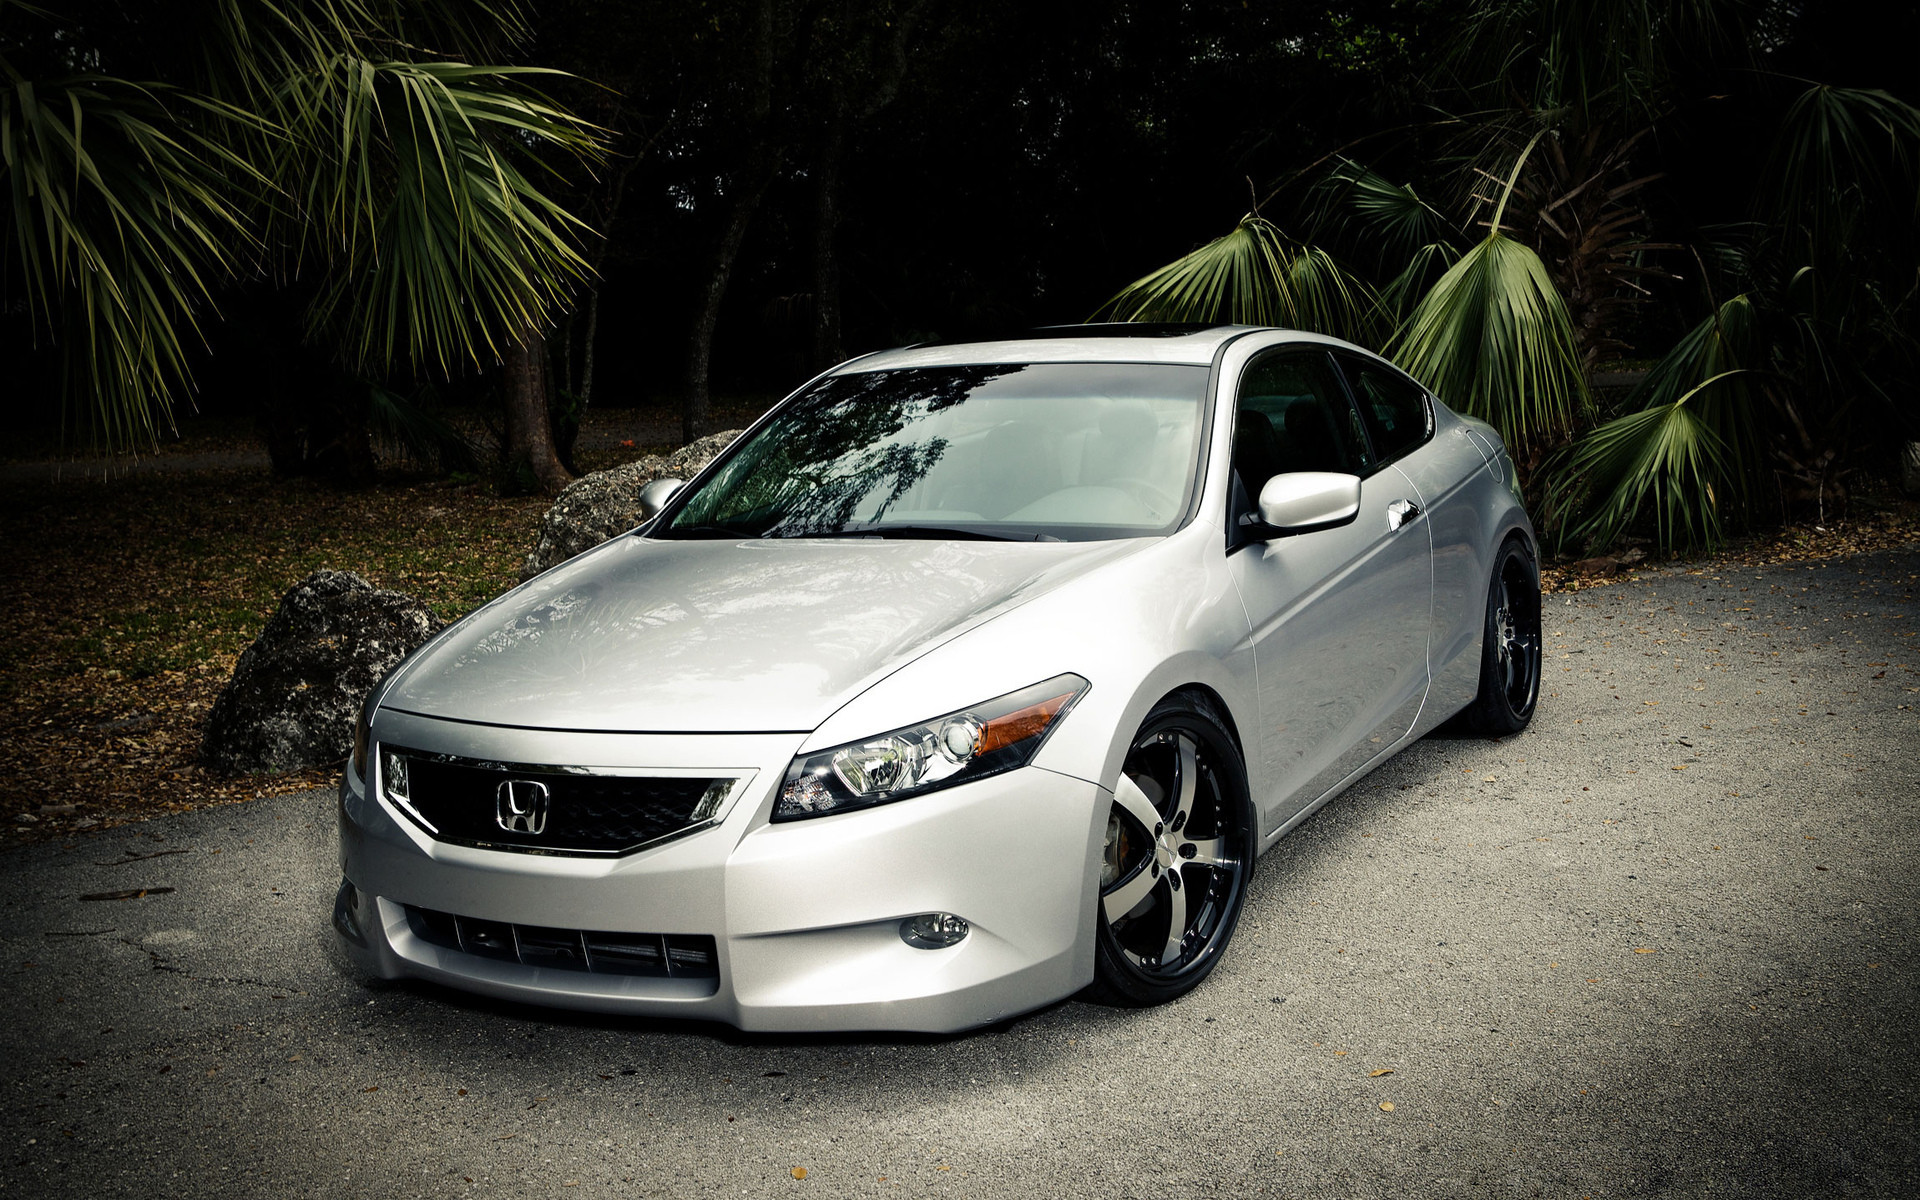 1920x1200 Honda Accord wallpapers and images - wallpapers, pictures, photos